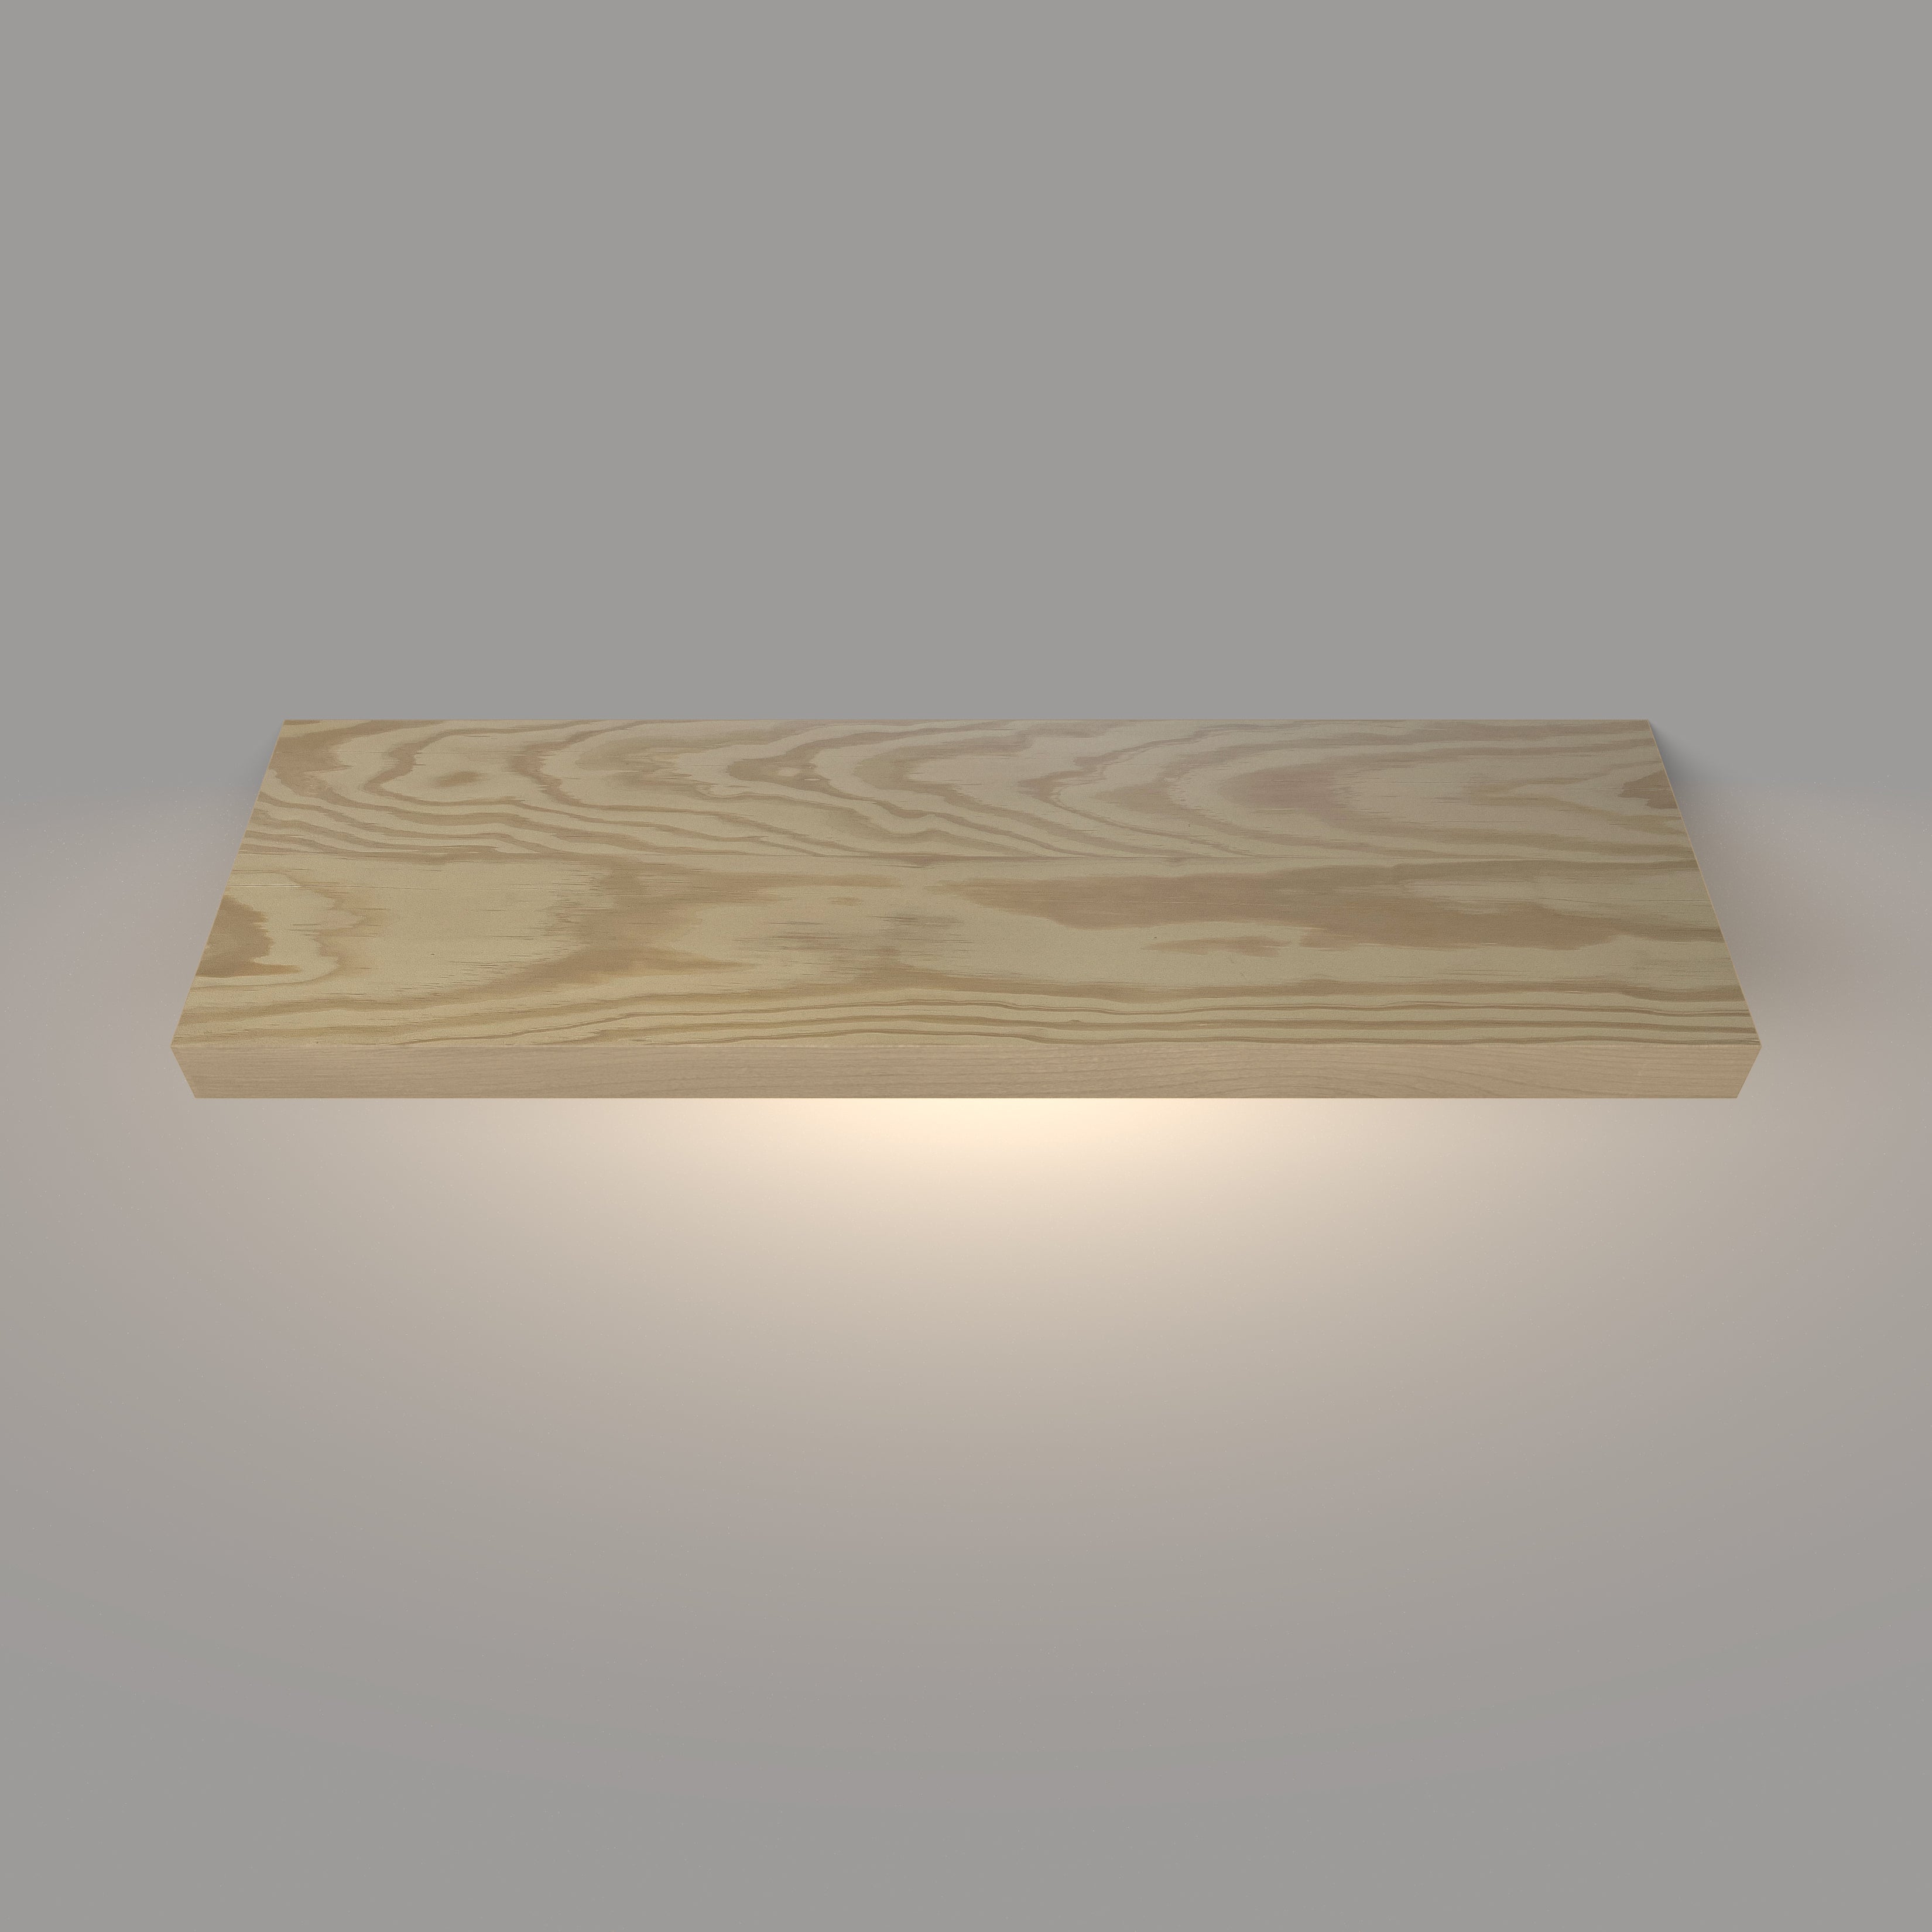 Pine 2 Inch Thick Lighted LED Floating Shelf - Battery